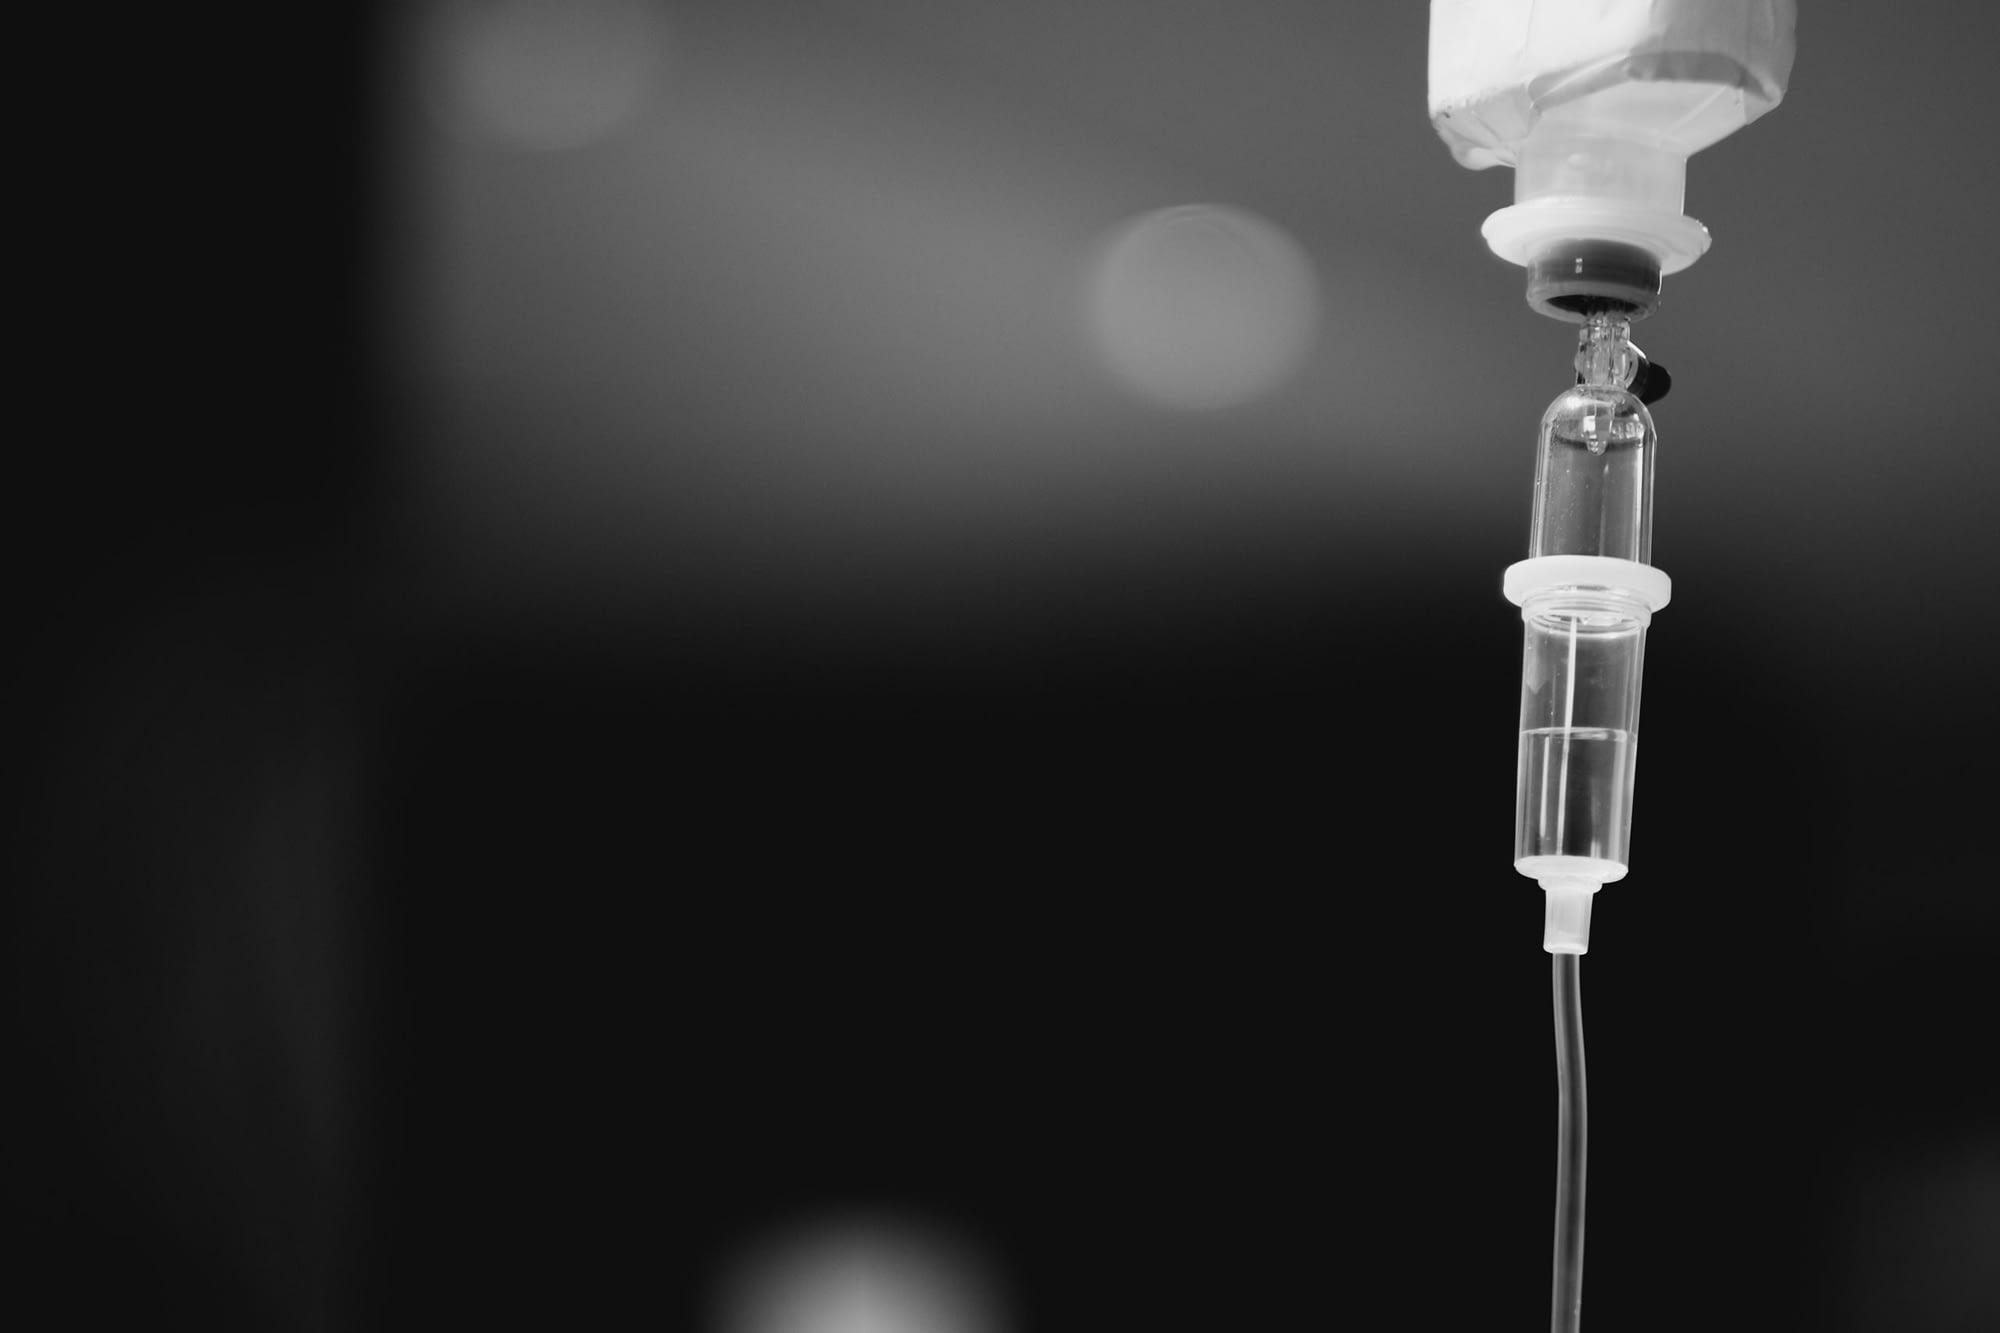 Chemotherapy for cancer patients in the hospital